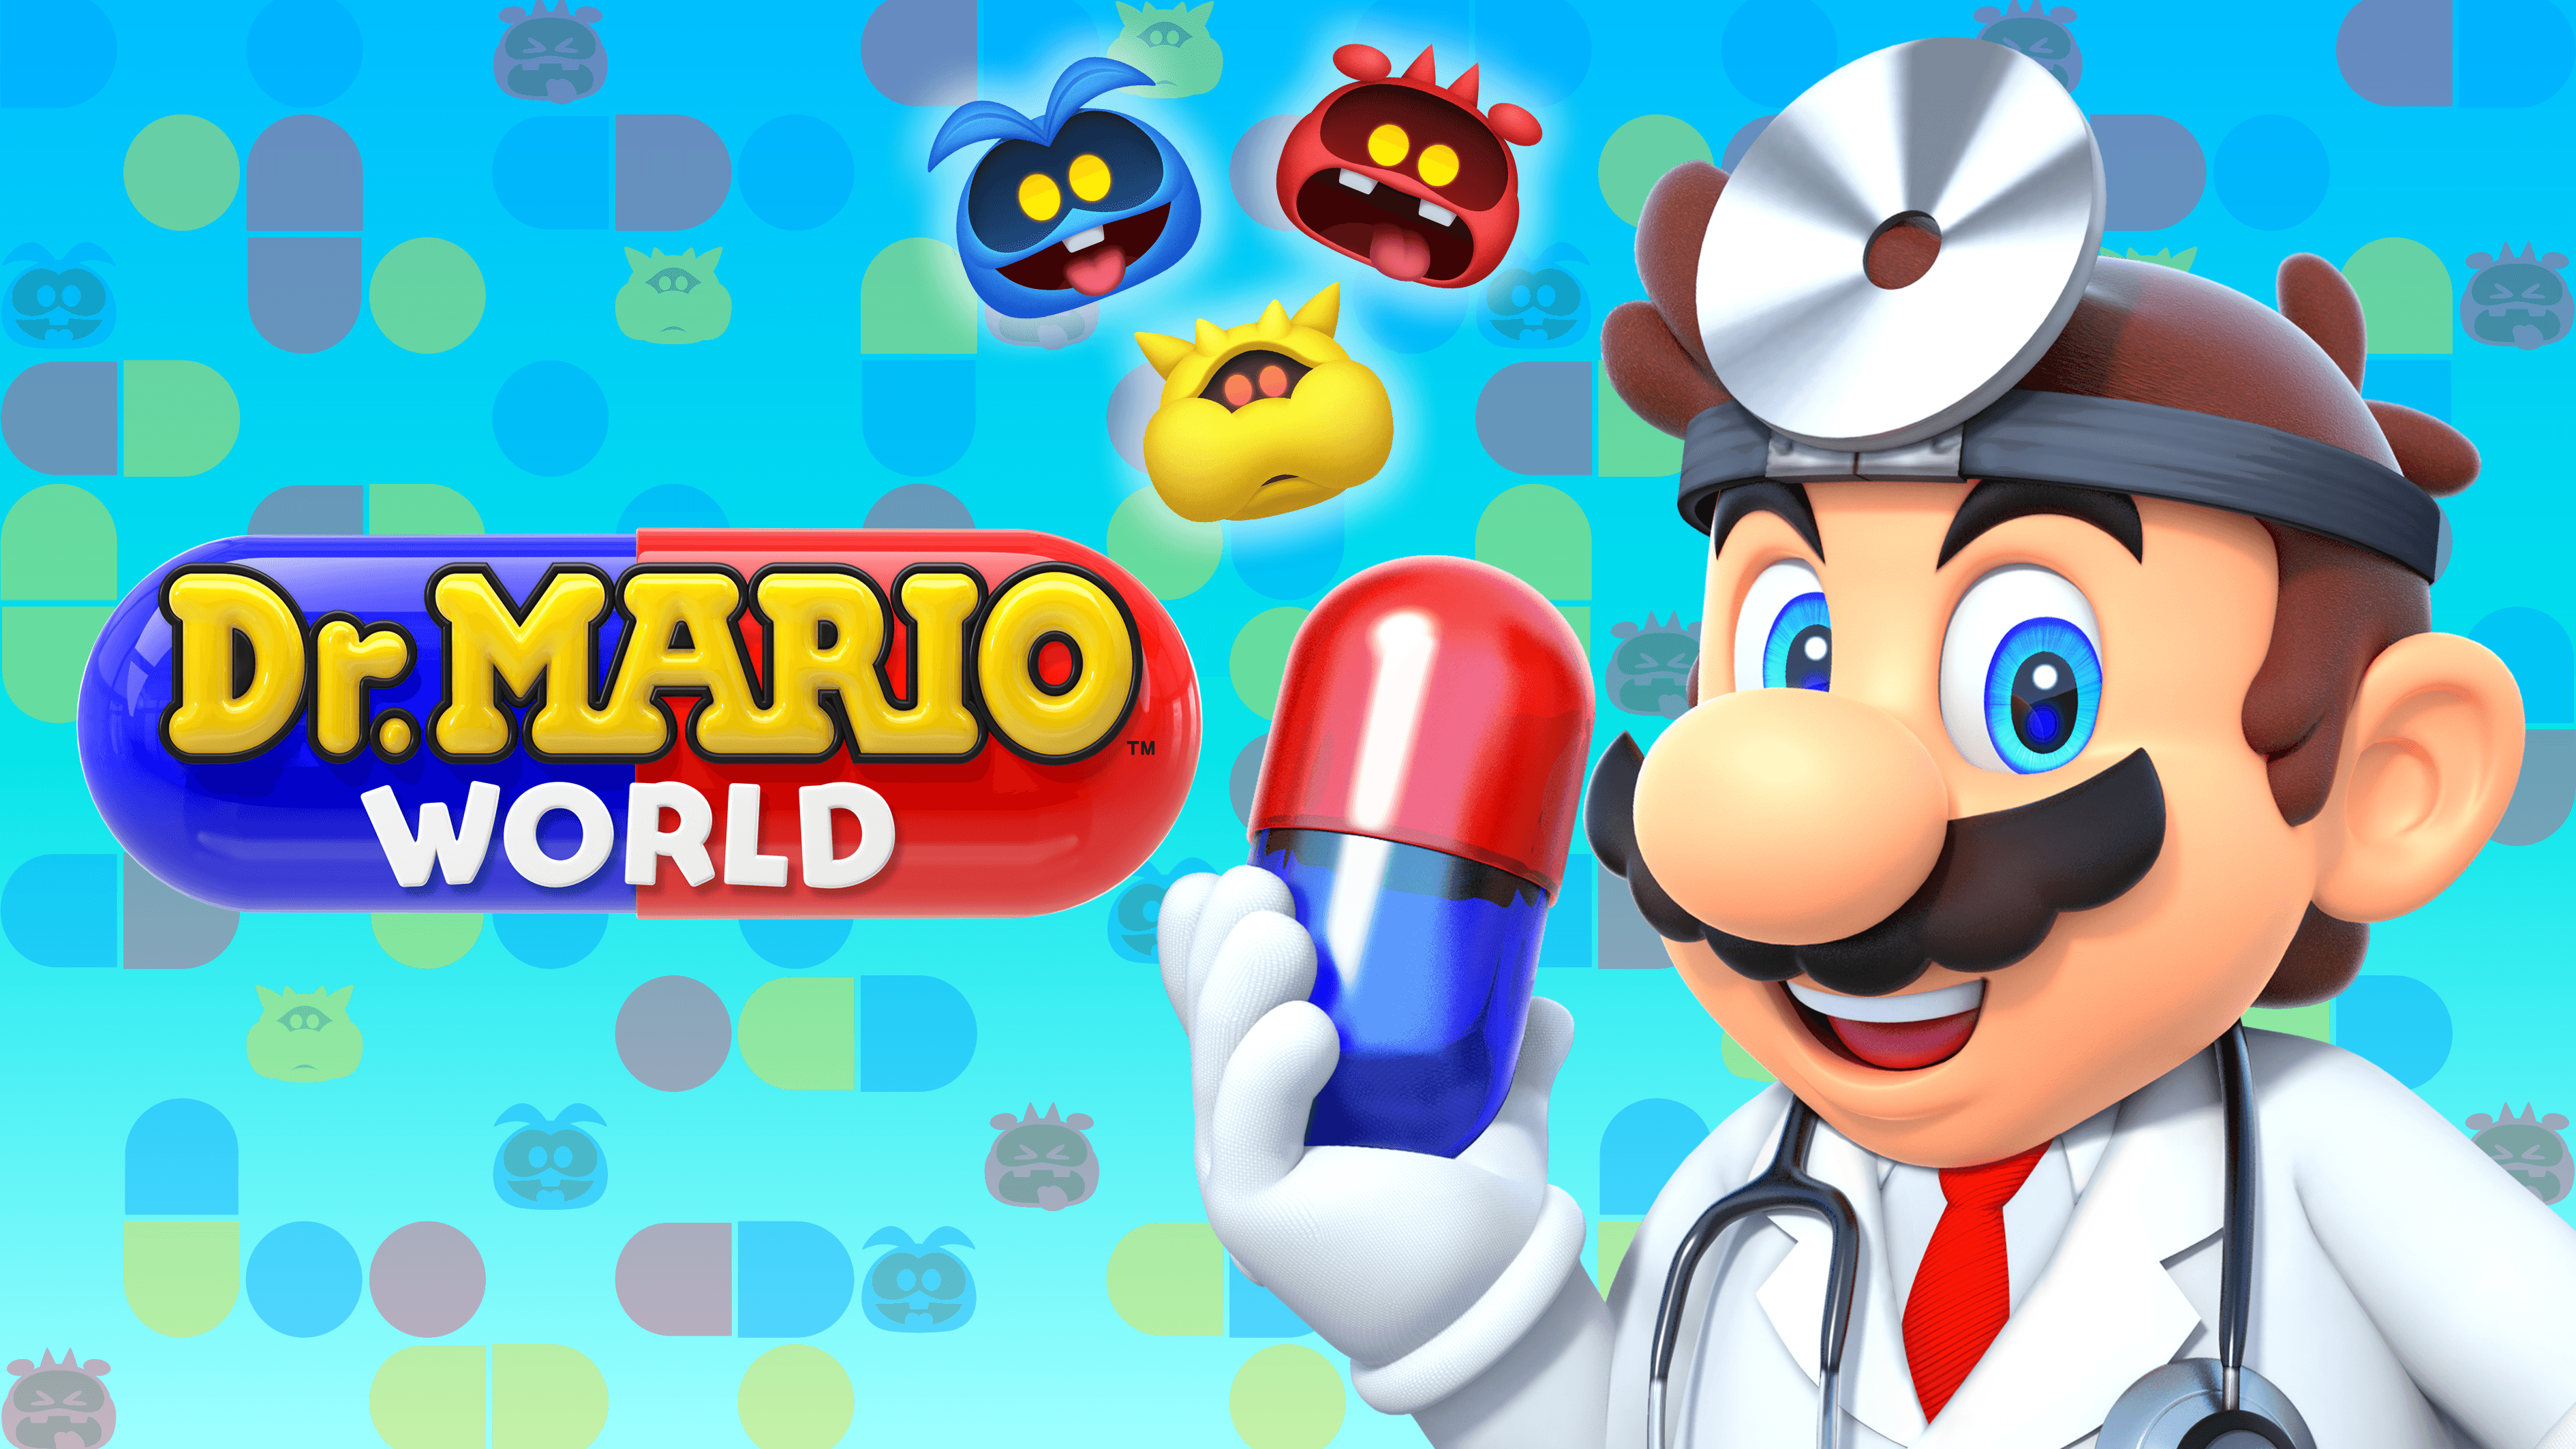 Dr Mario Rules